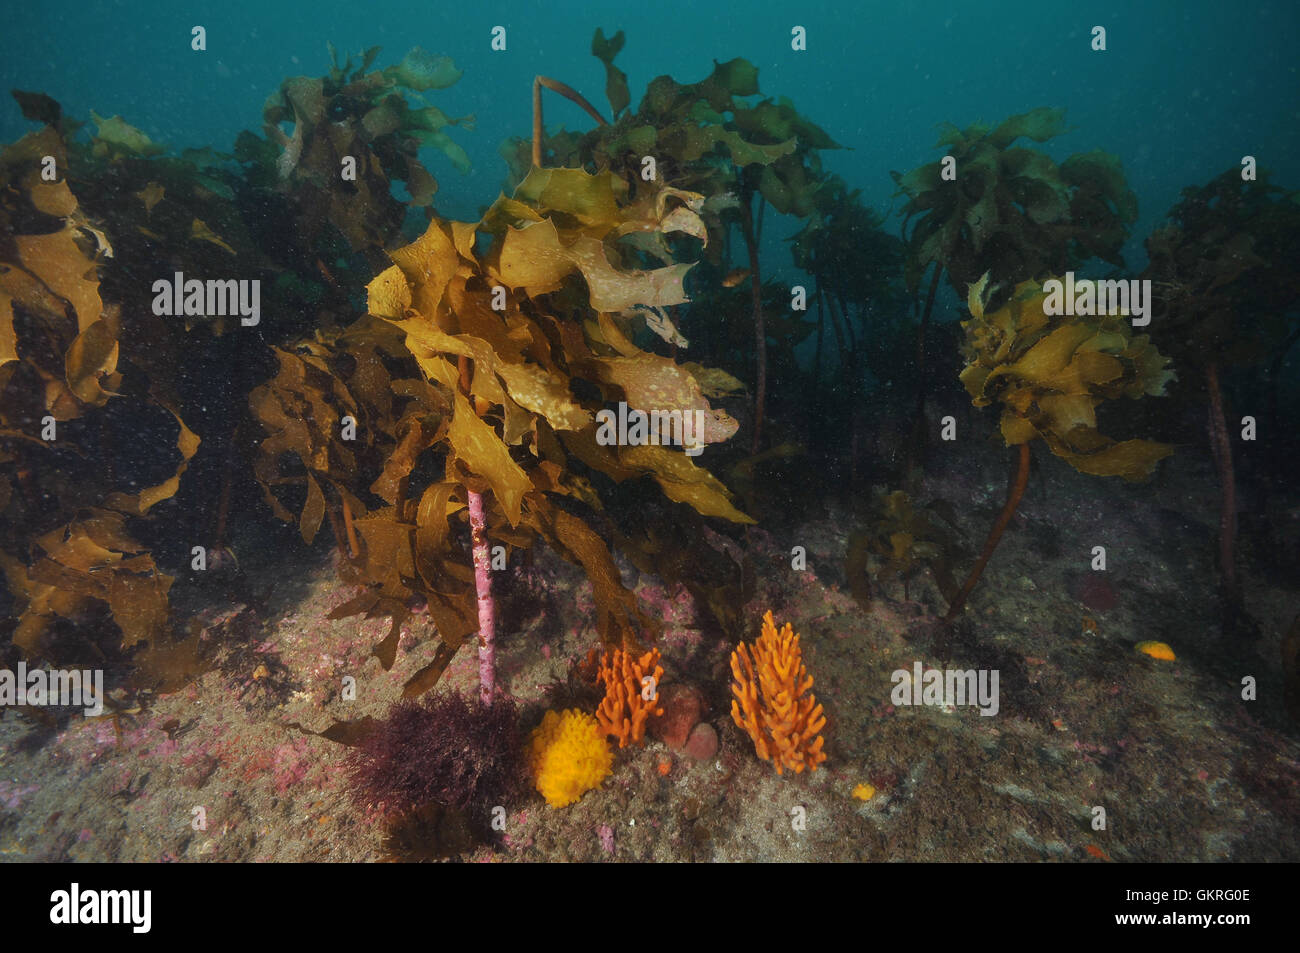 Sponges and kelp in southern Pacific ocean Stock Photo